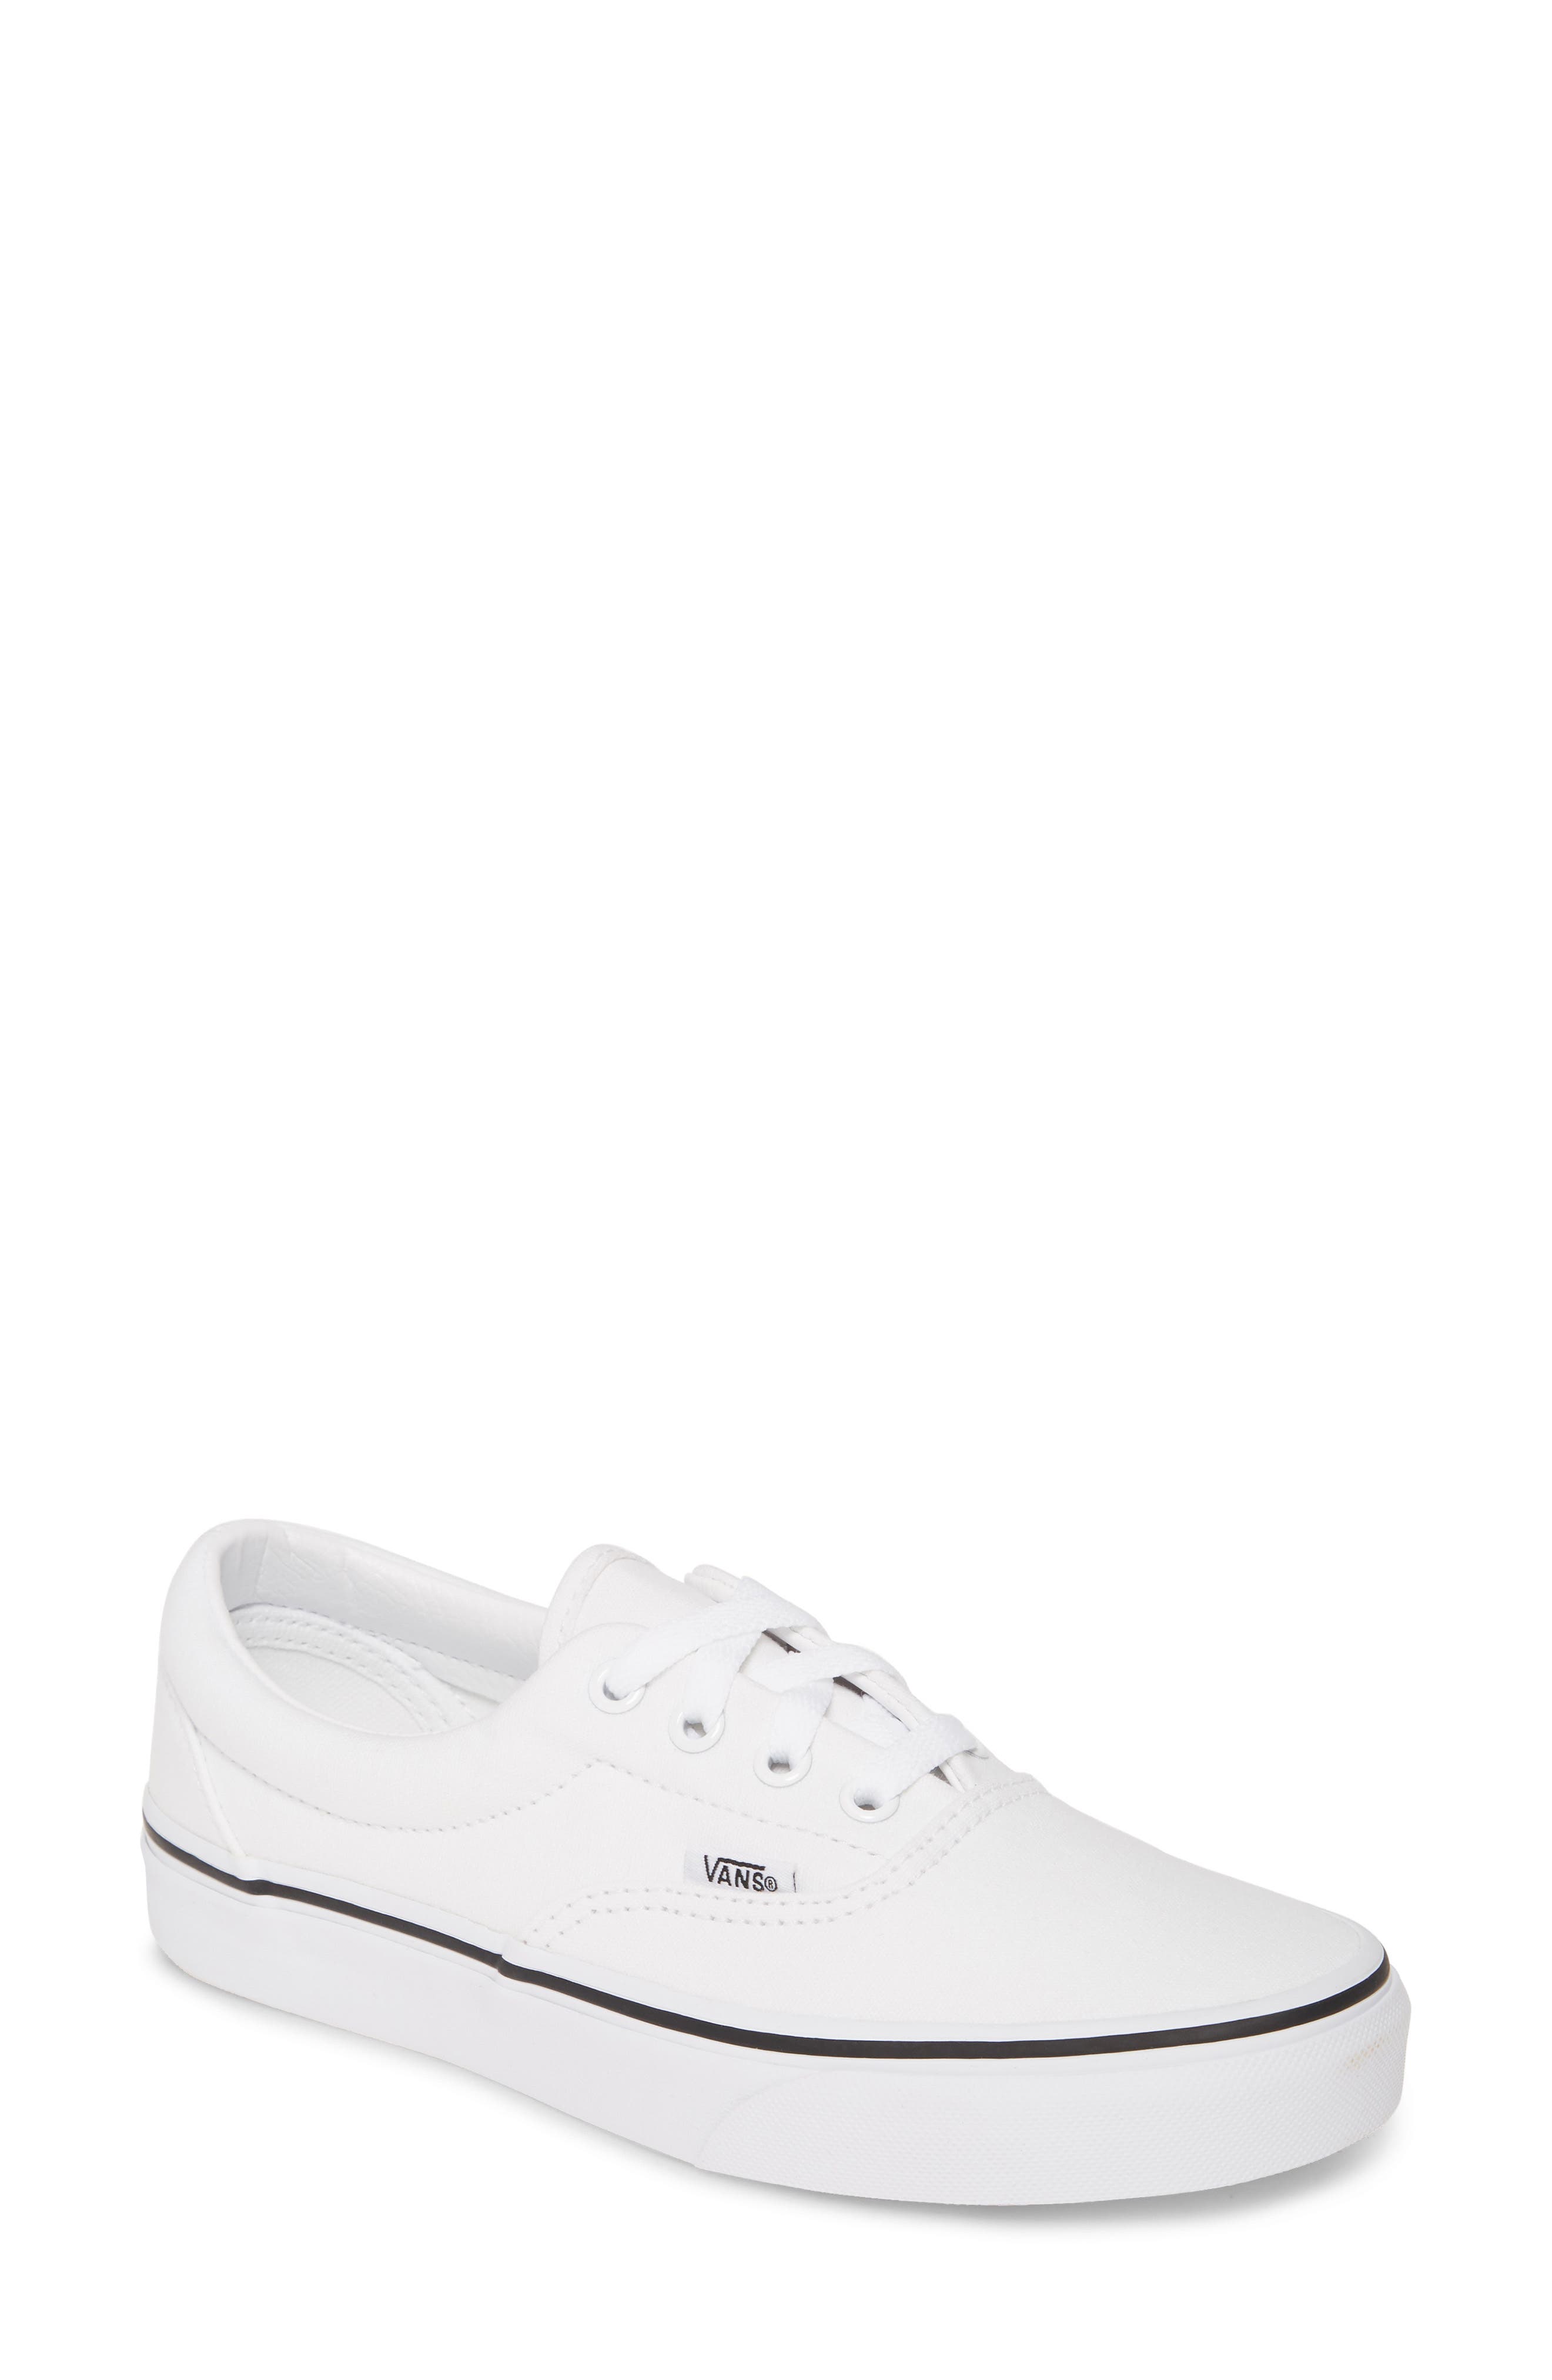 womens white lace up vans